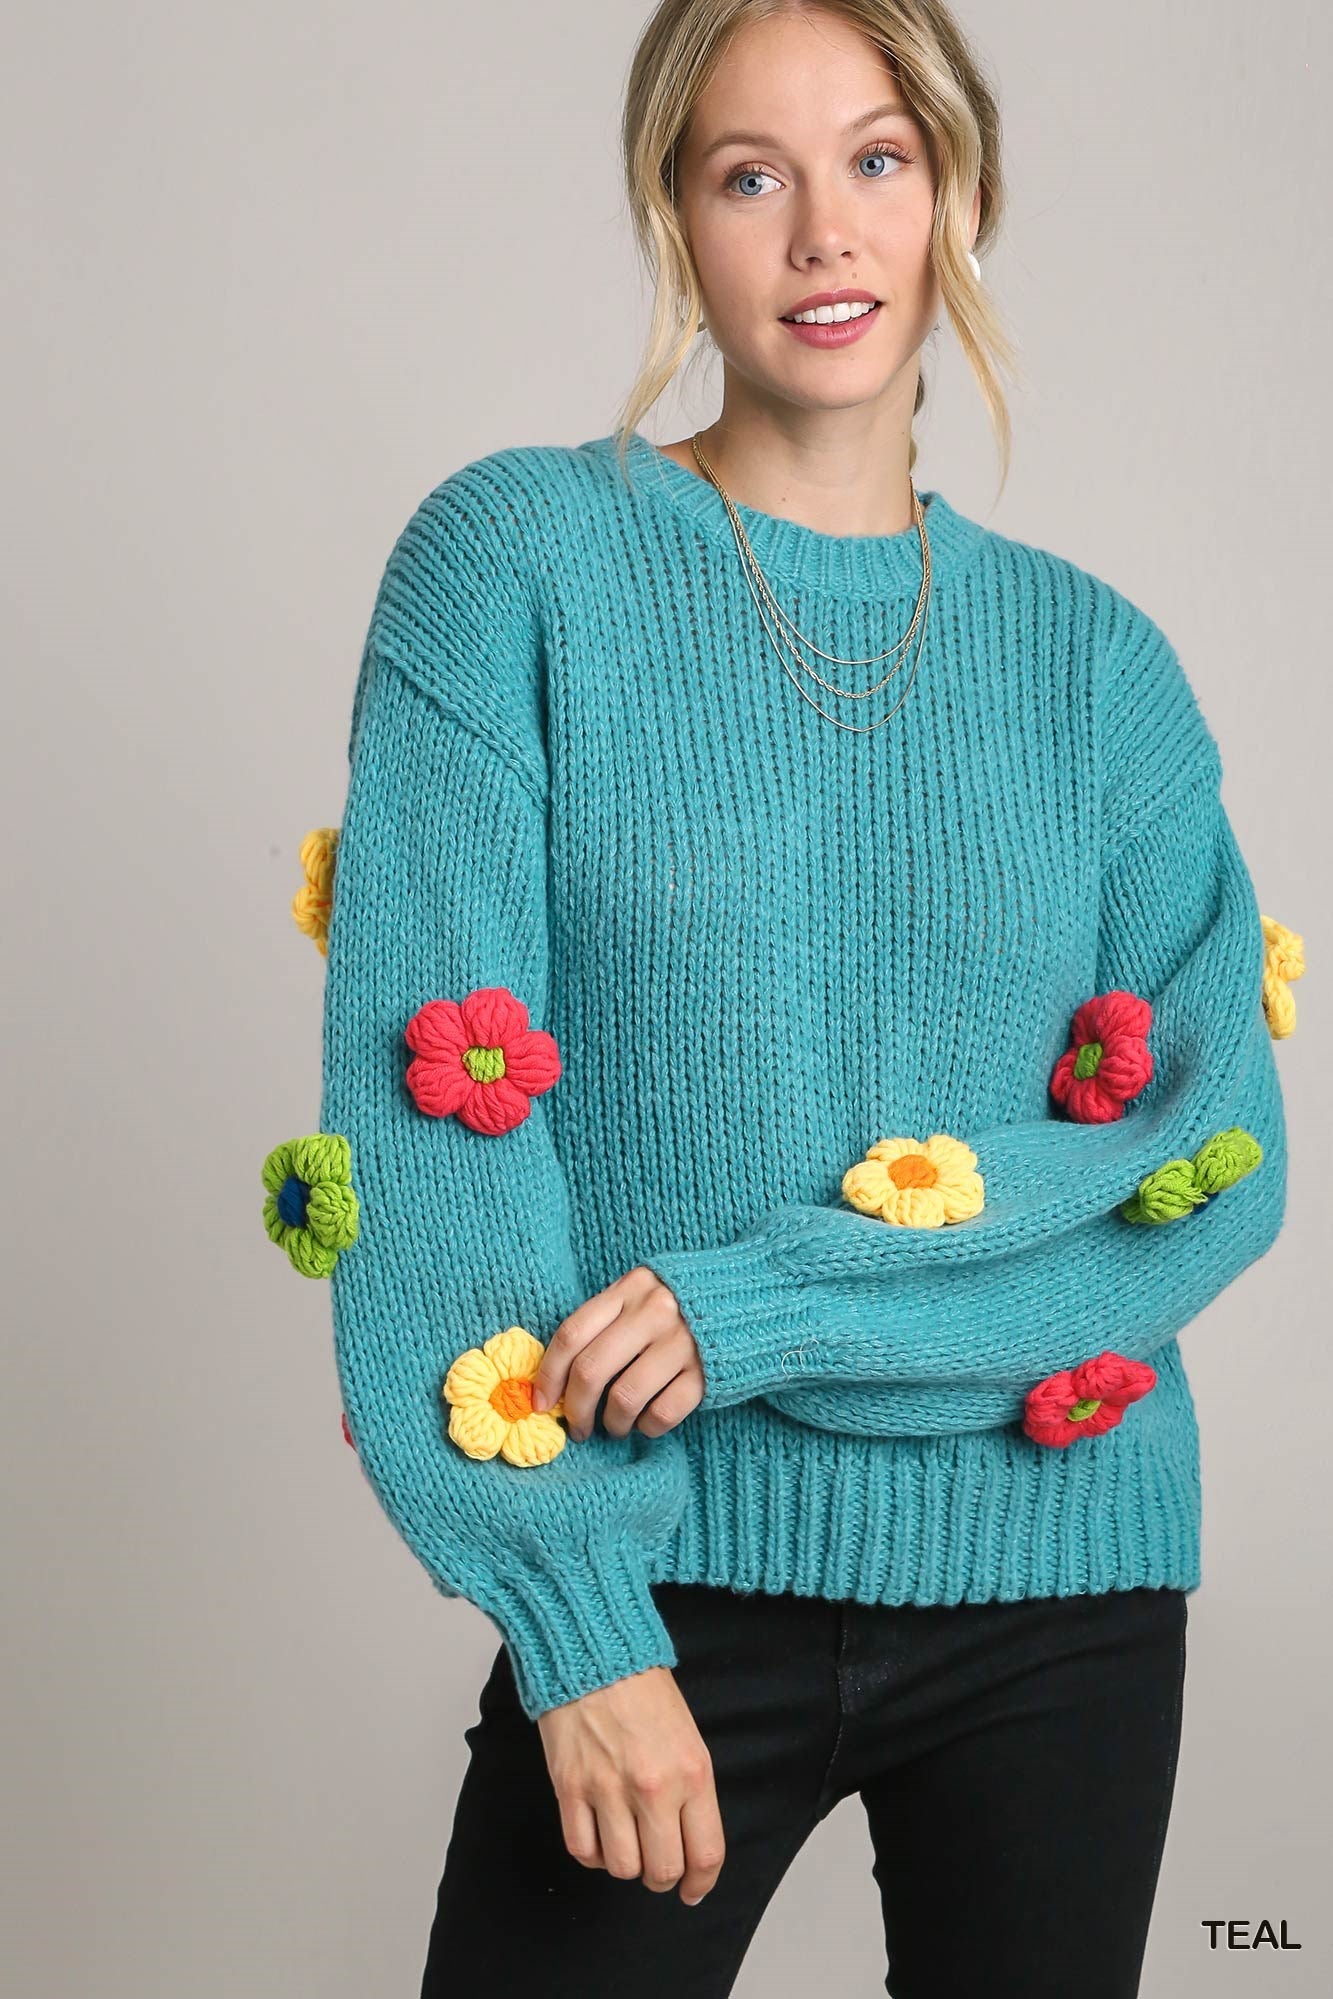 Floral Knit Pullover Sweater